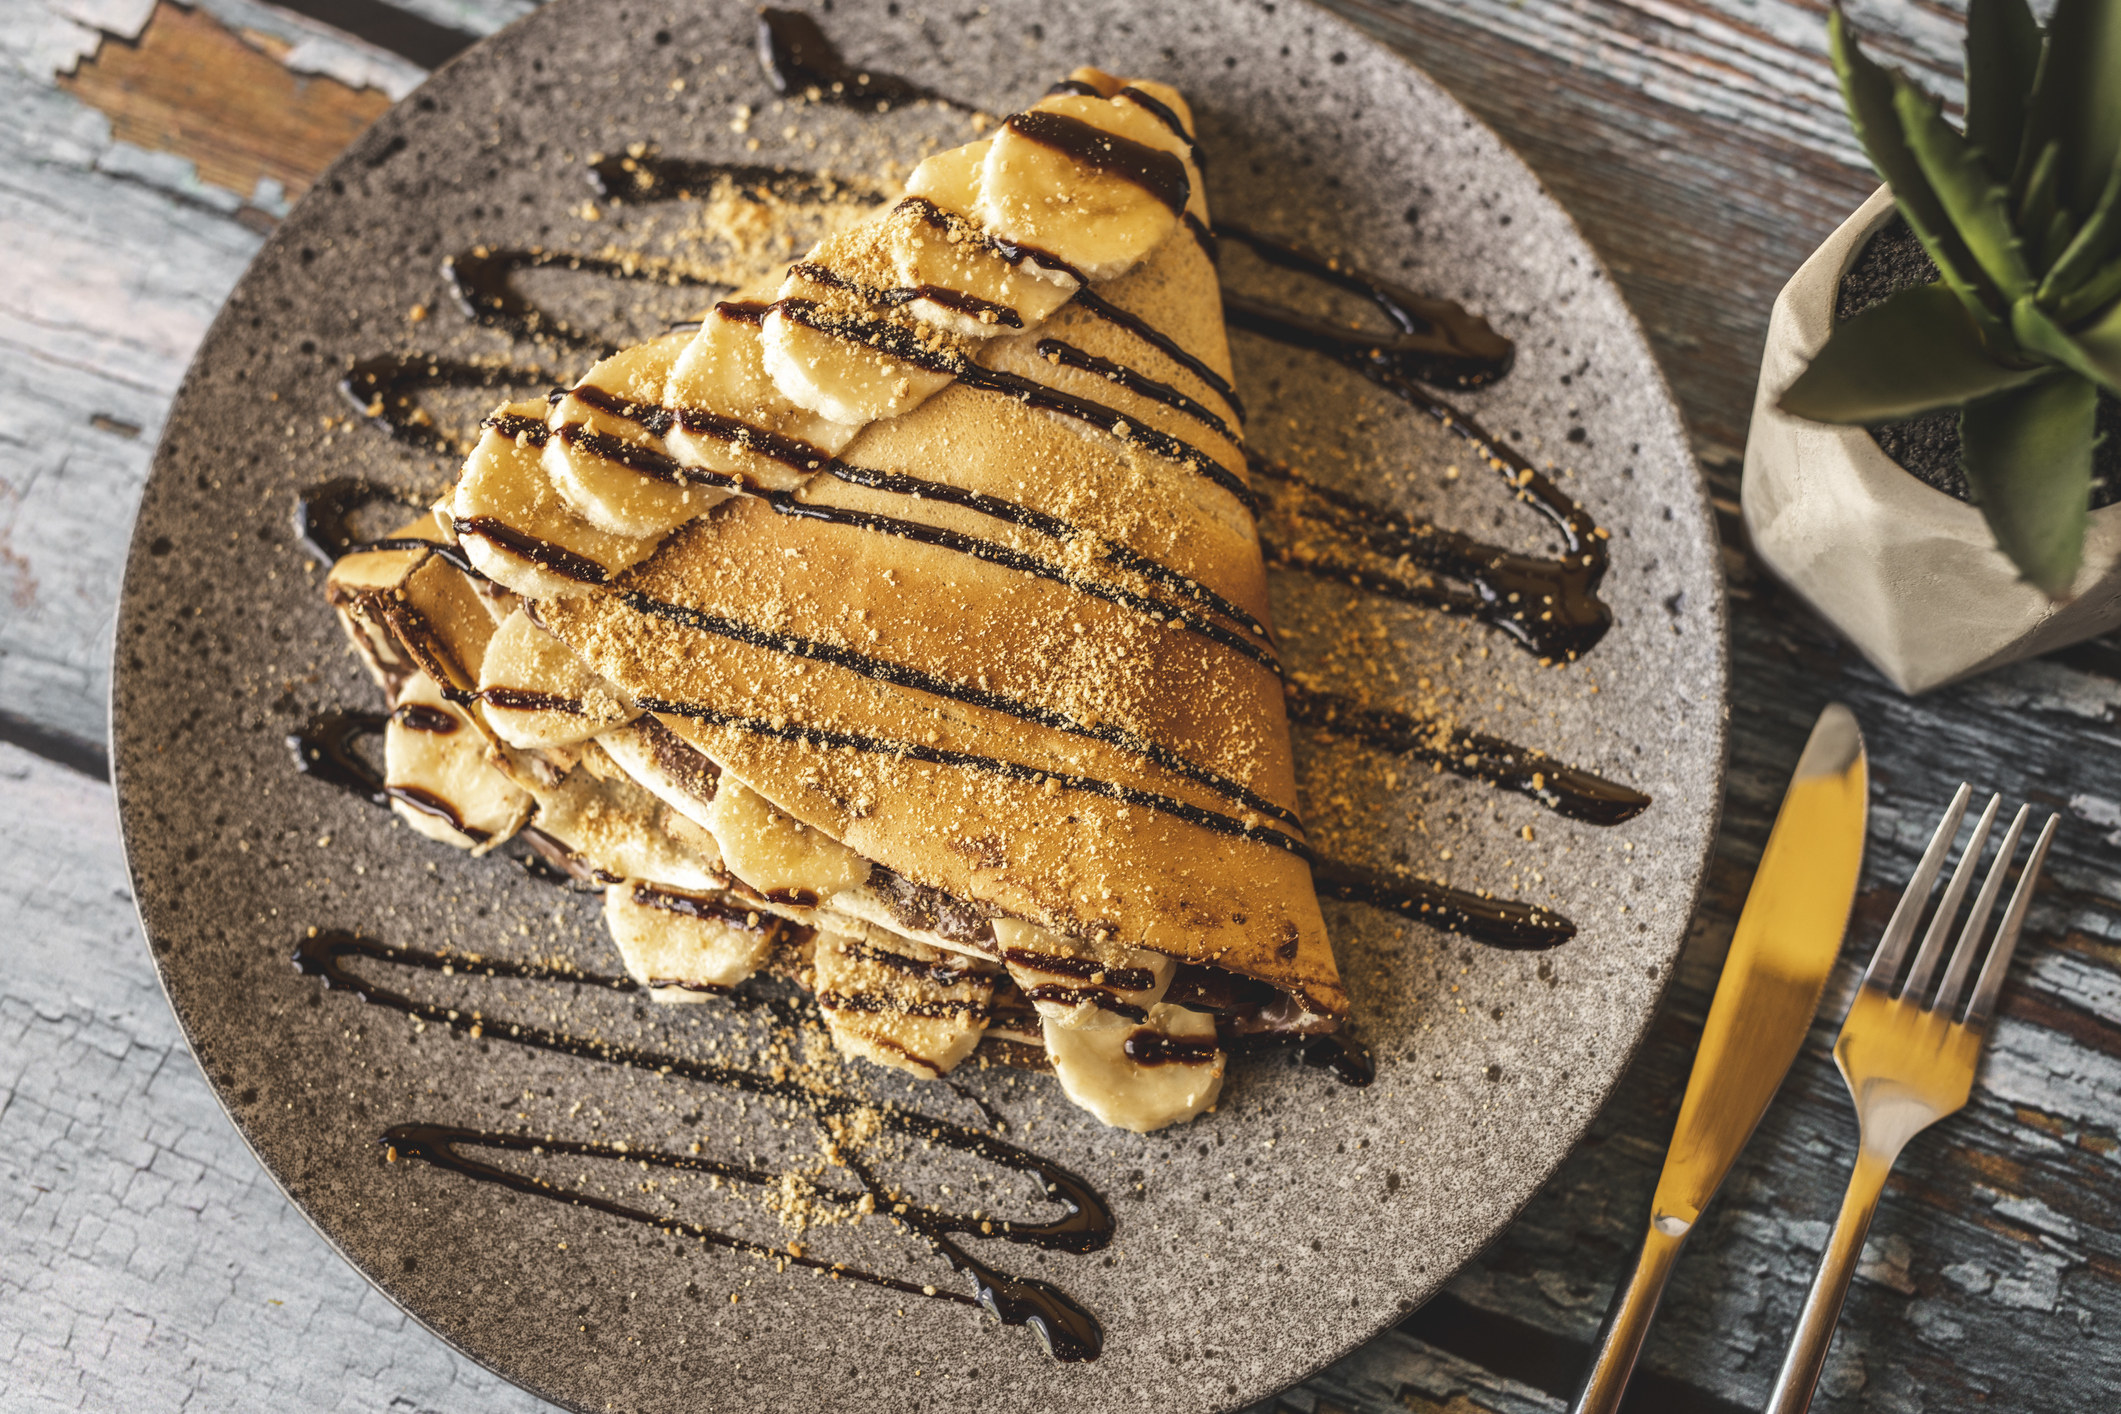 Nutella drizzled on a crepe